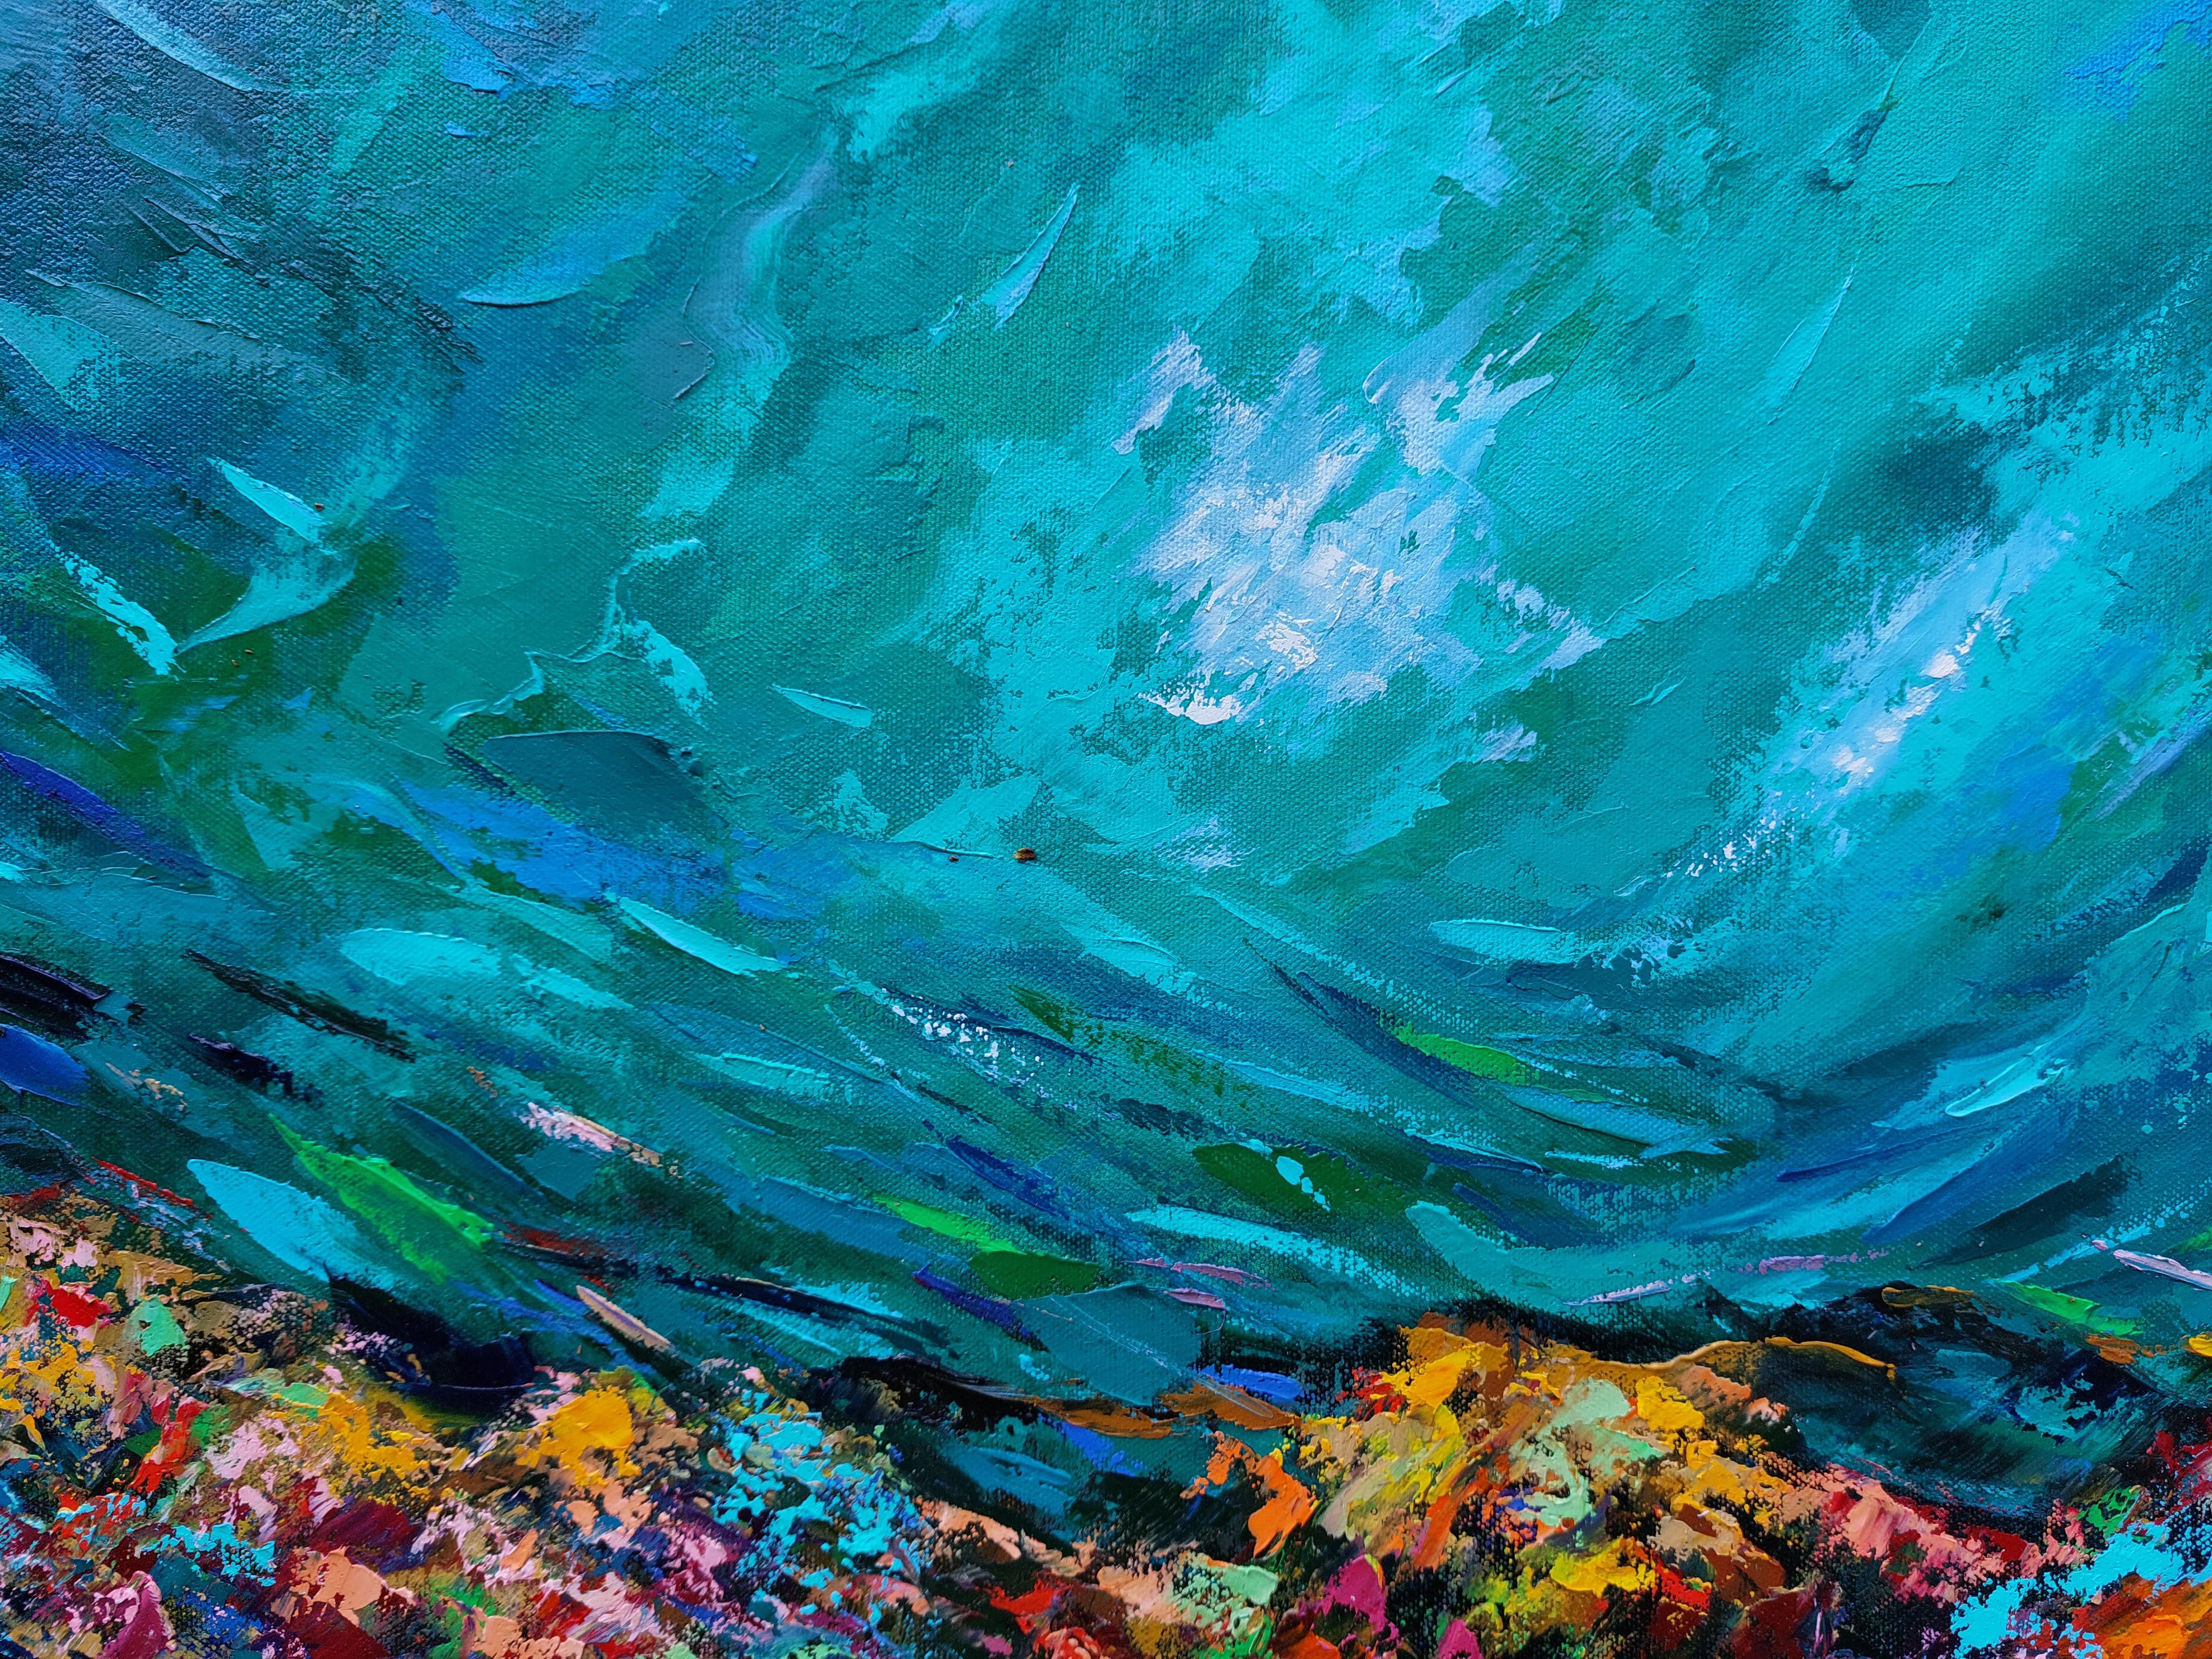 Tropical Coral Reef Painting by Olga Nikitina
Title: Coral Reef
Size: 100x75cm
Materials: Oil, Rolled Canvas, Palette Knife.
Shipping: gallery standards packaging, rolled in tube, express shipping with tracking number. 
Enhance your original oil